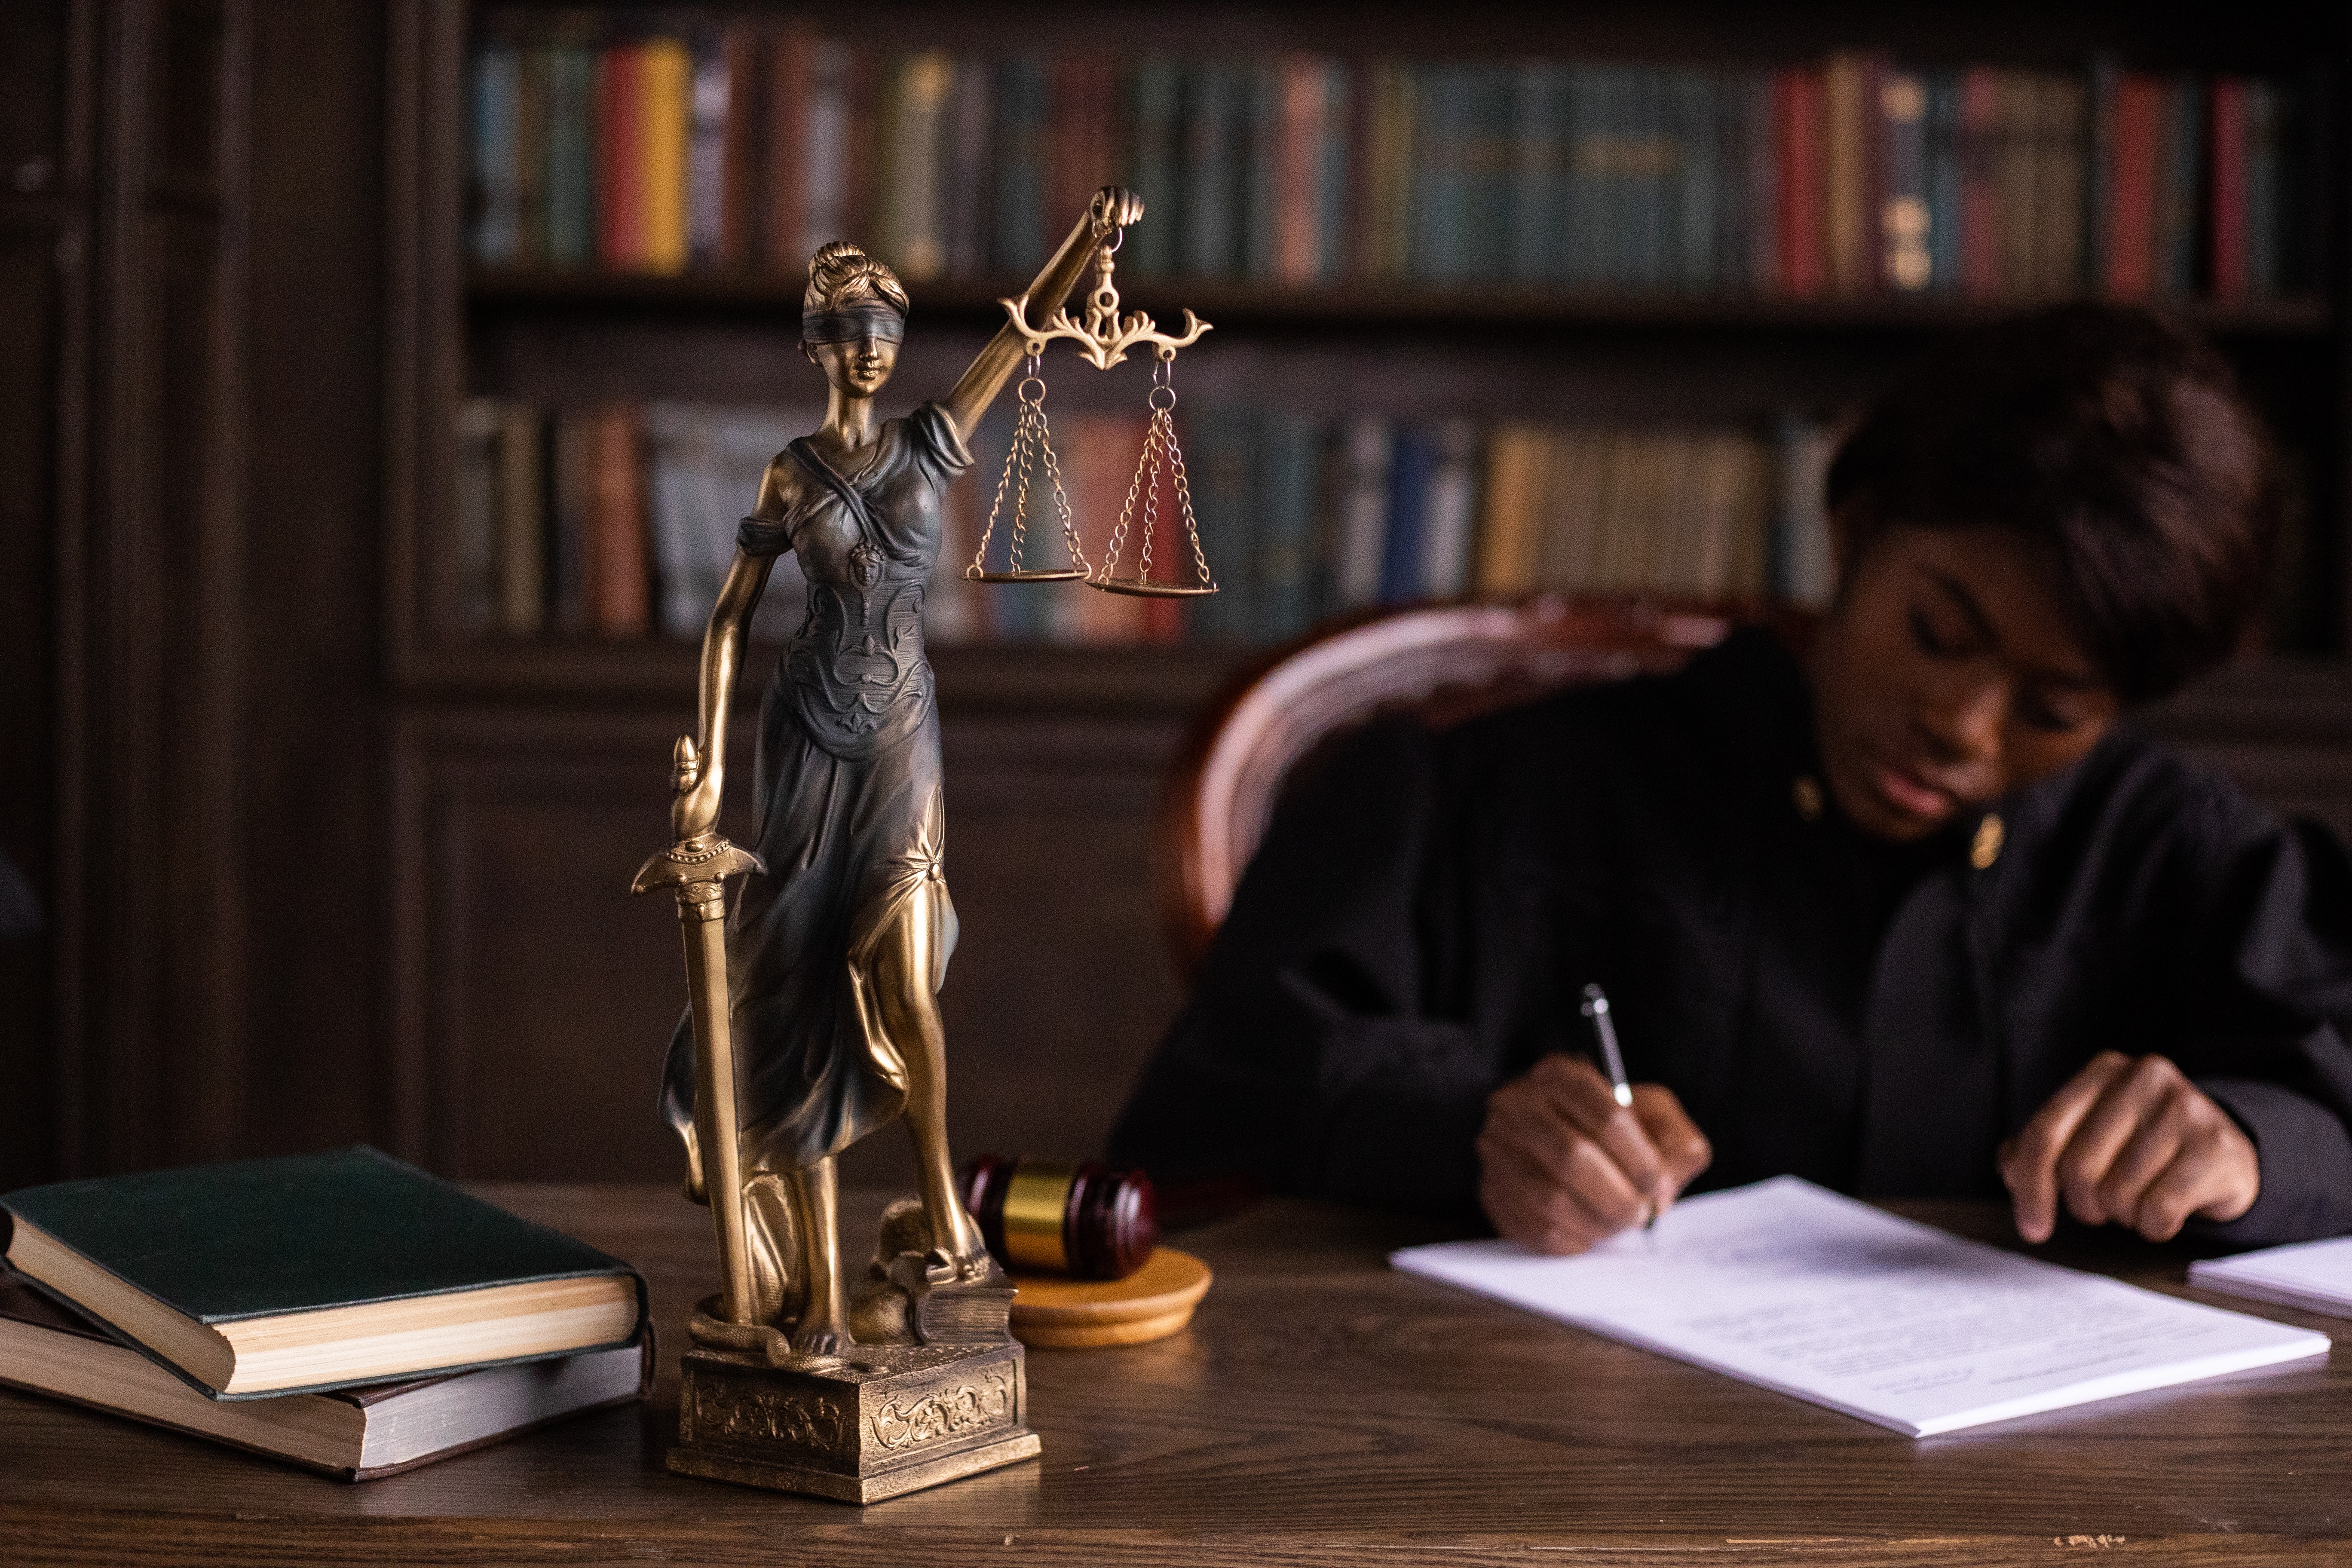 List of law firms in Ghana: contact details, specialties, and more